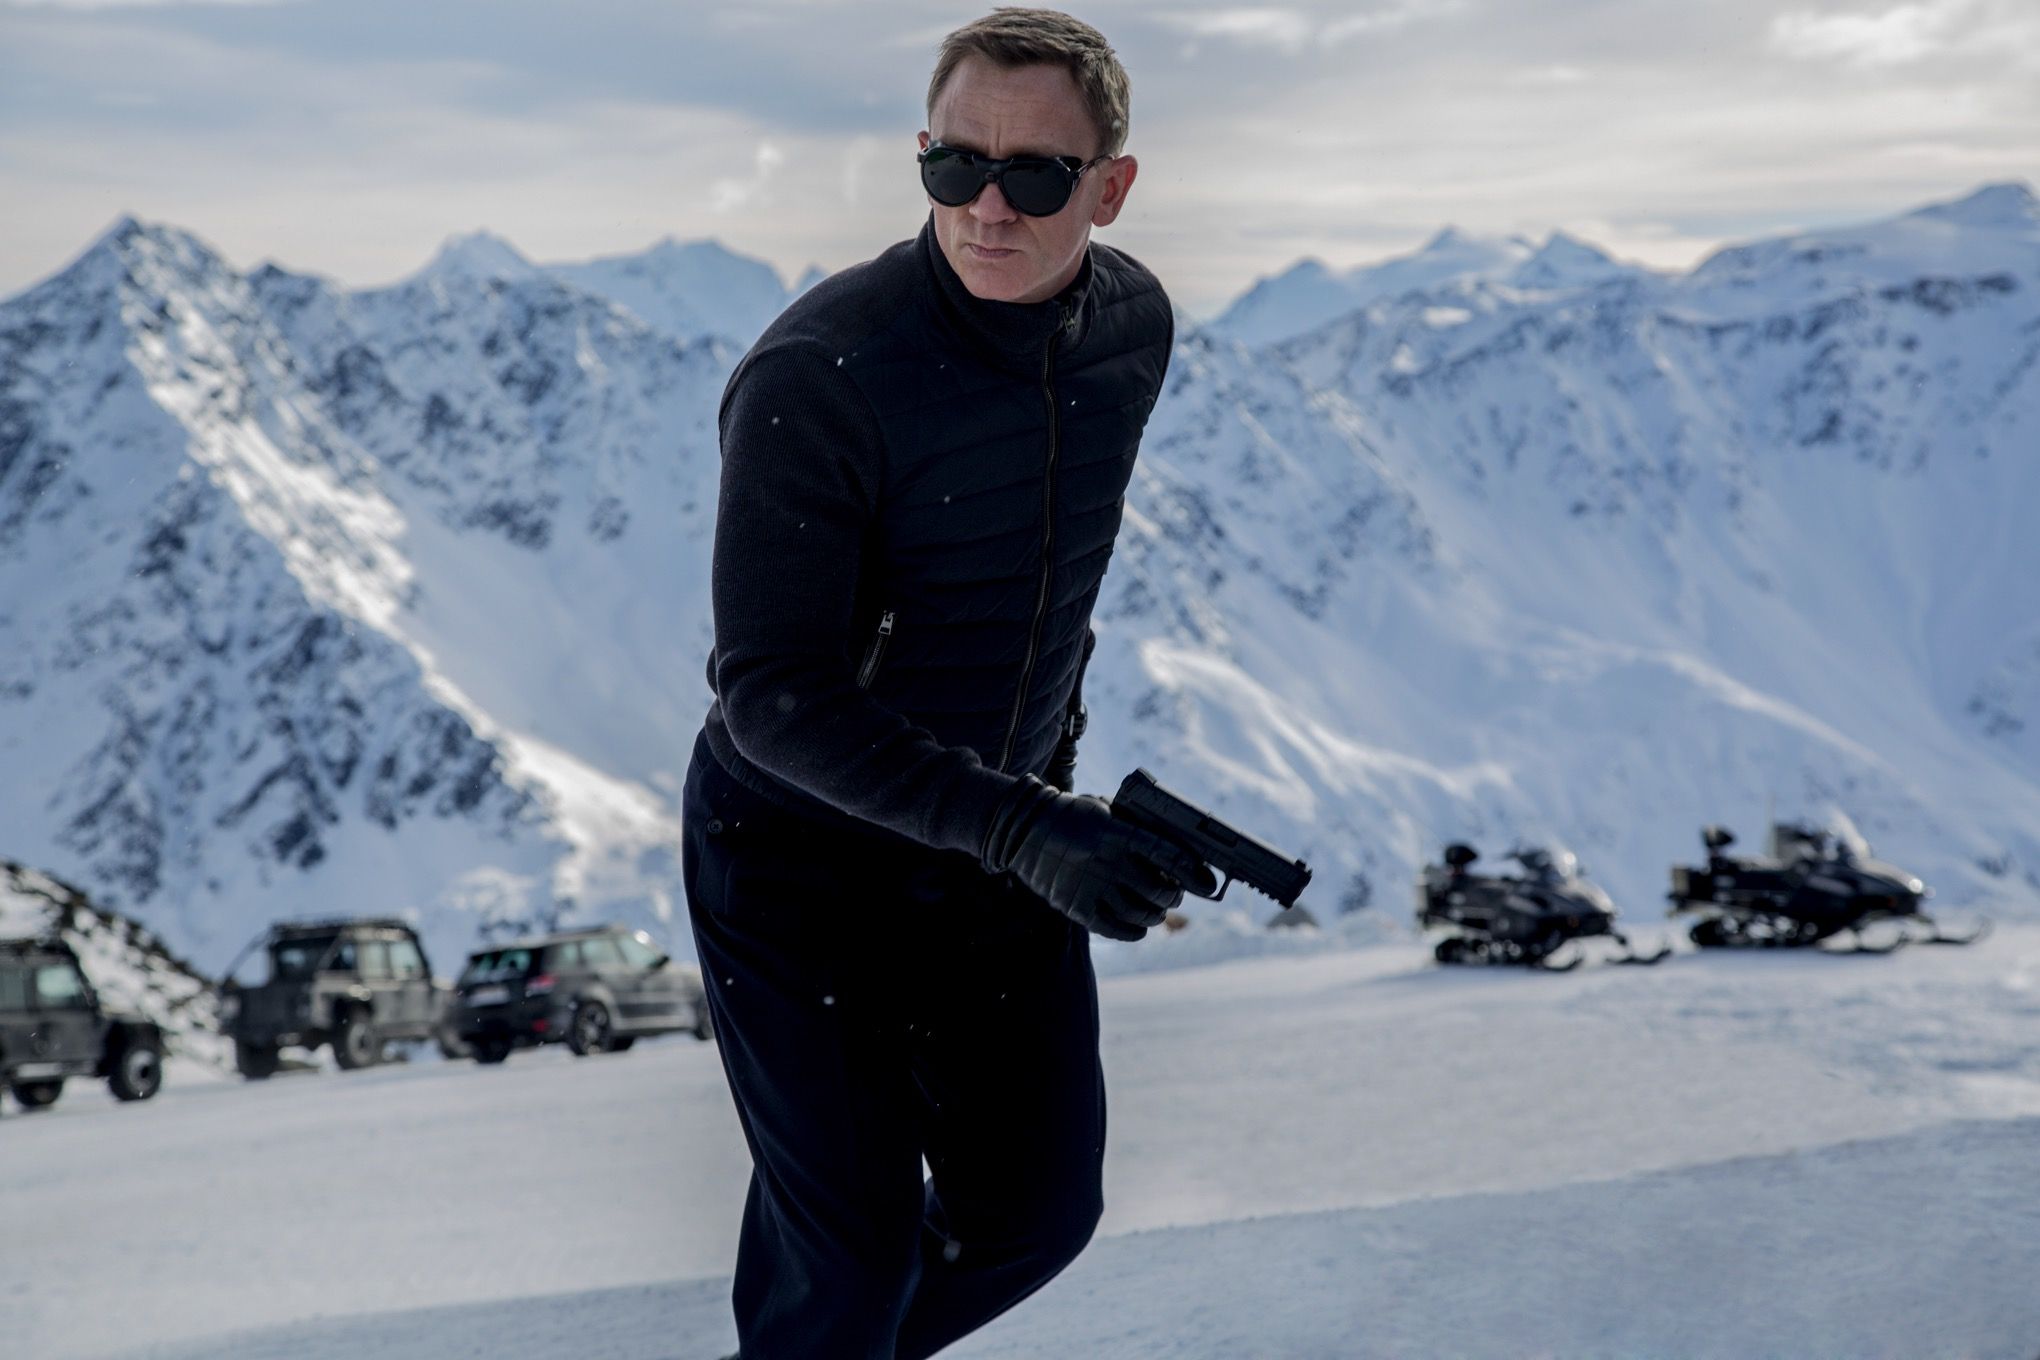 Bond has gadgets and gizmos aplenty in new ‘Spectre’ trailer